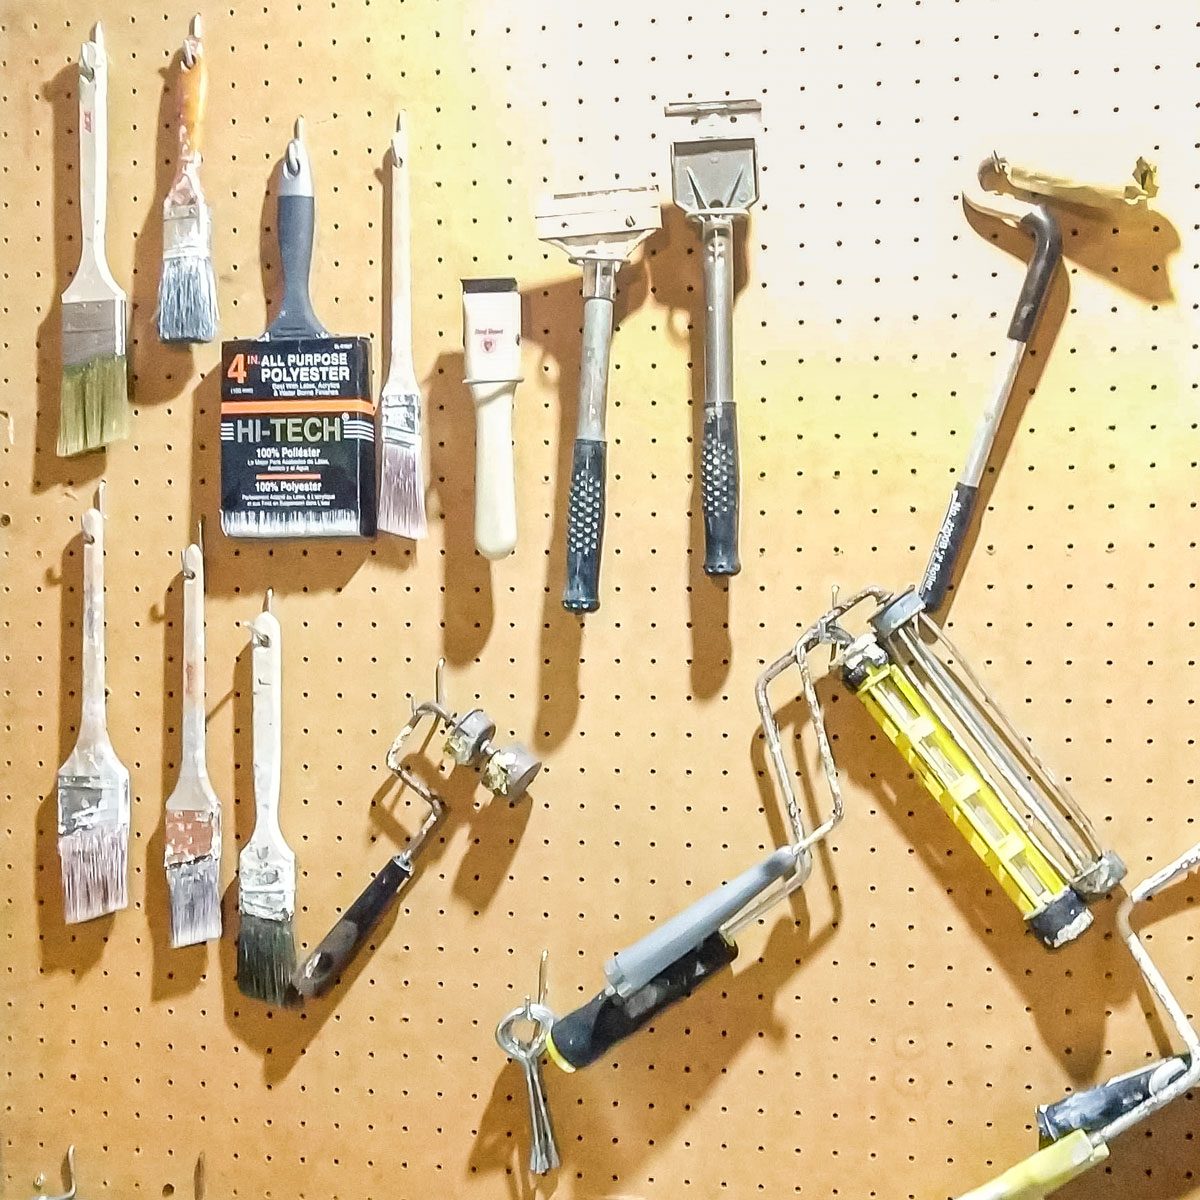 Tools Hanged on A Pegboard